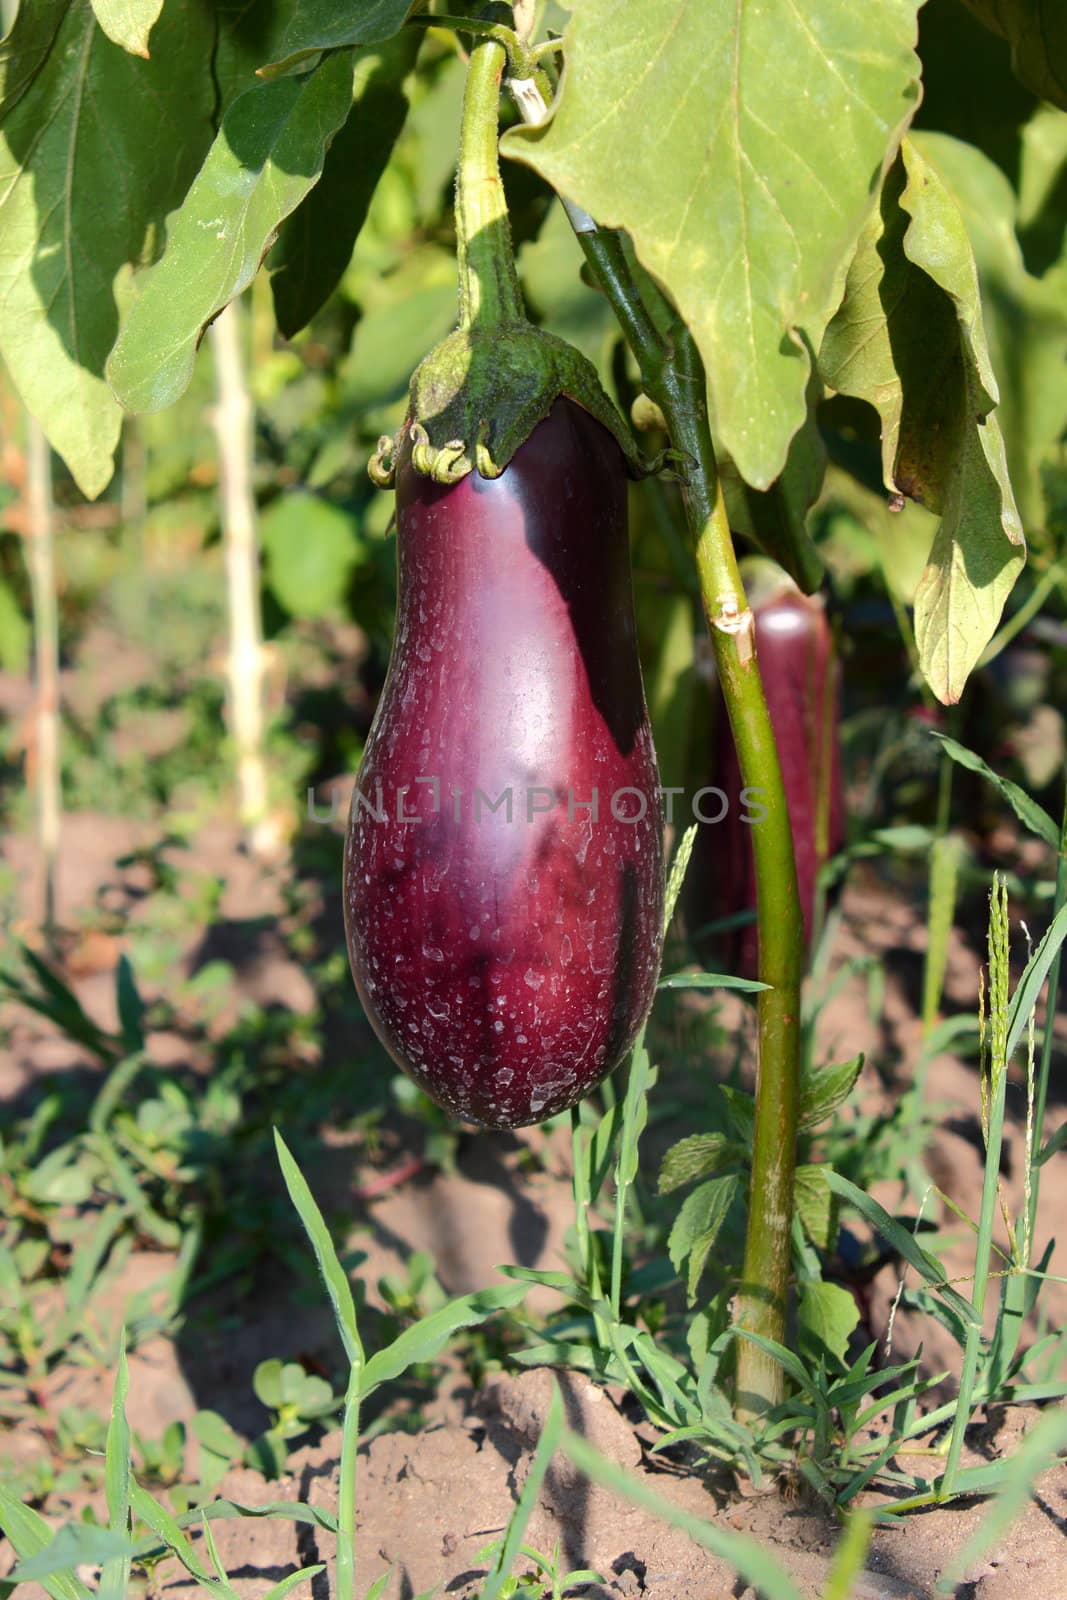 grown eggplants in the garden on a summer day